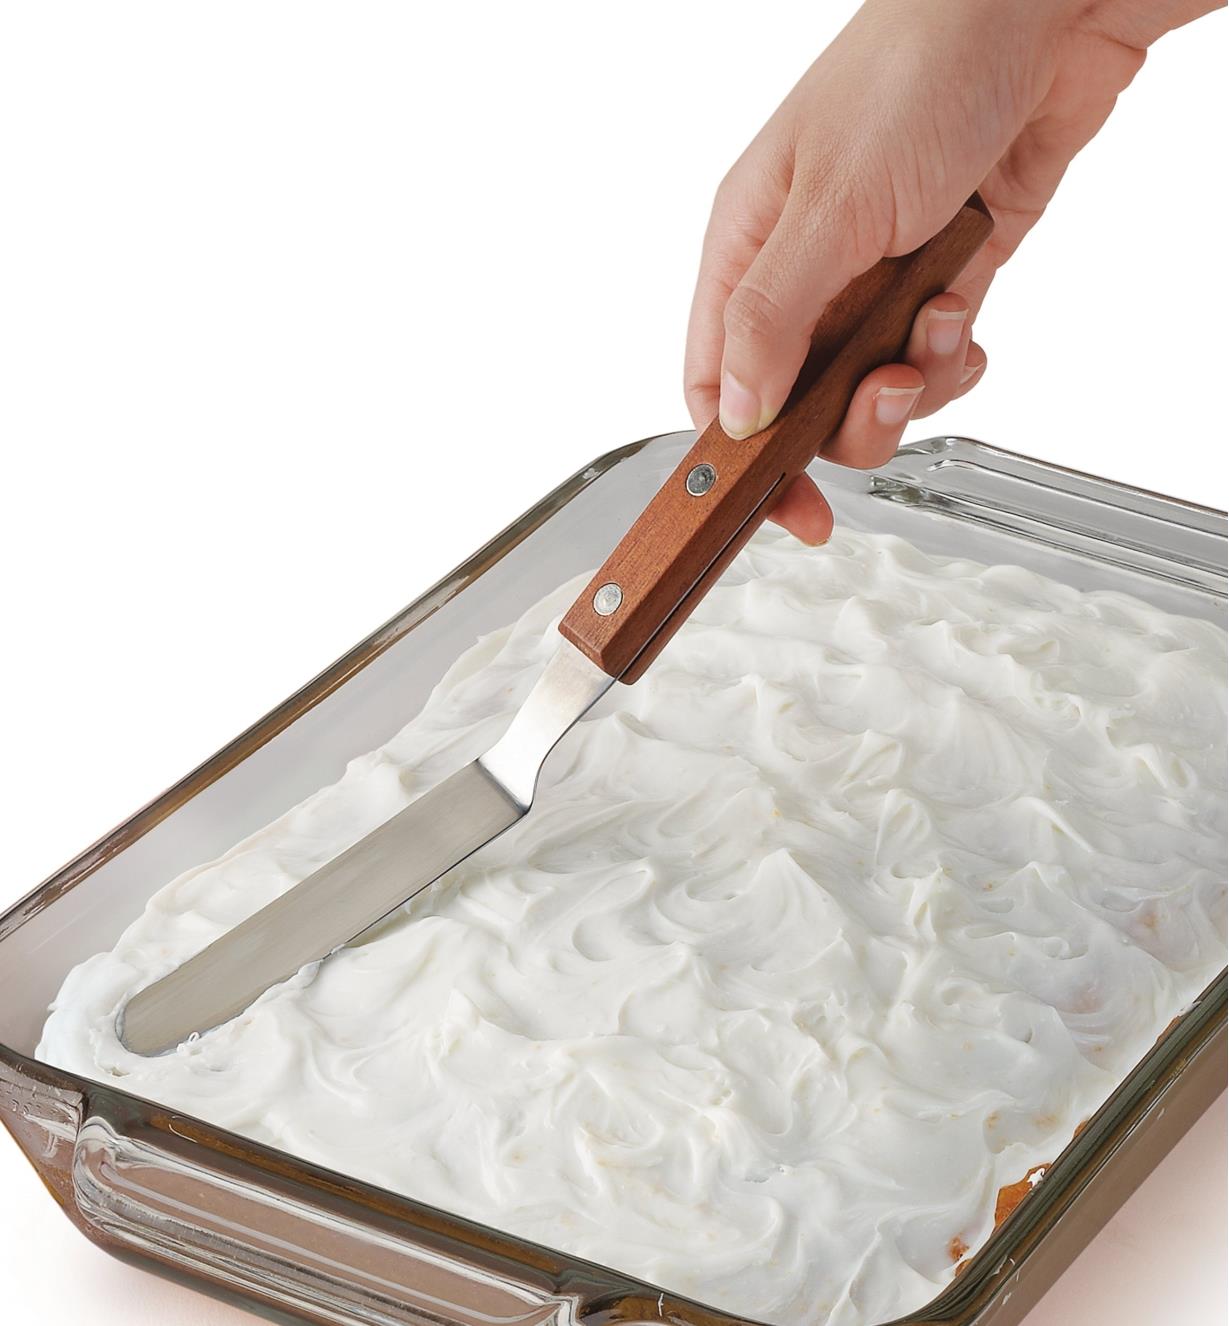 Using the Offset Frosting Spatula to frost a cake in a baking pan